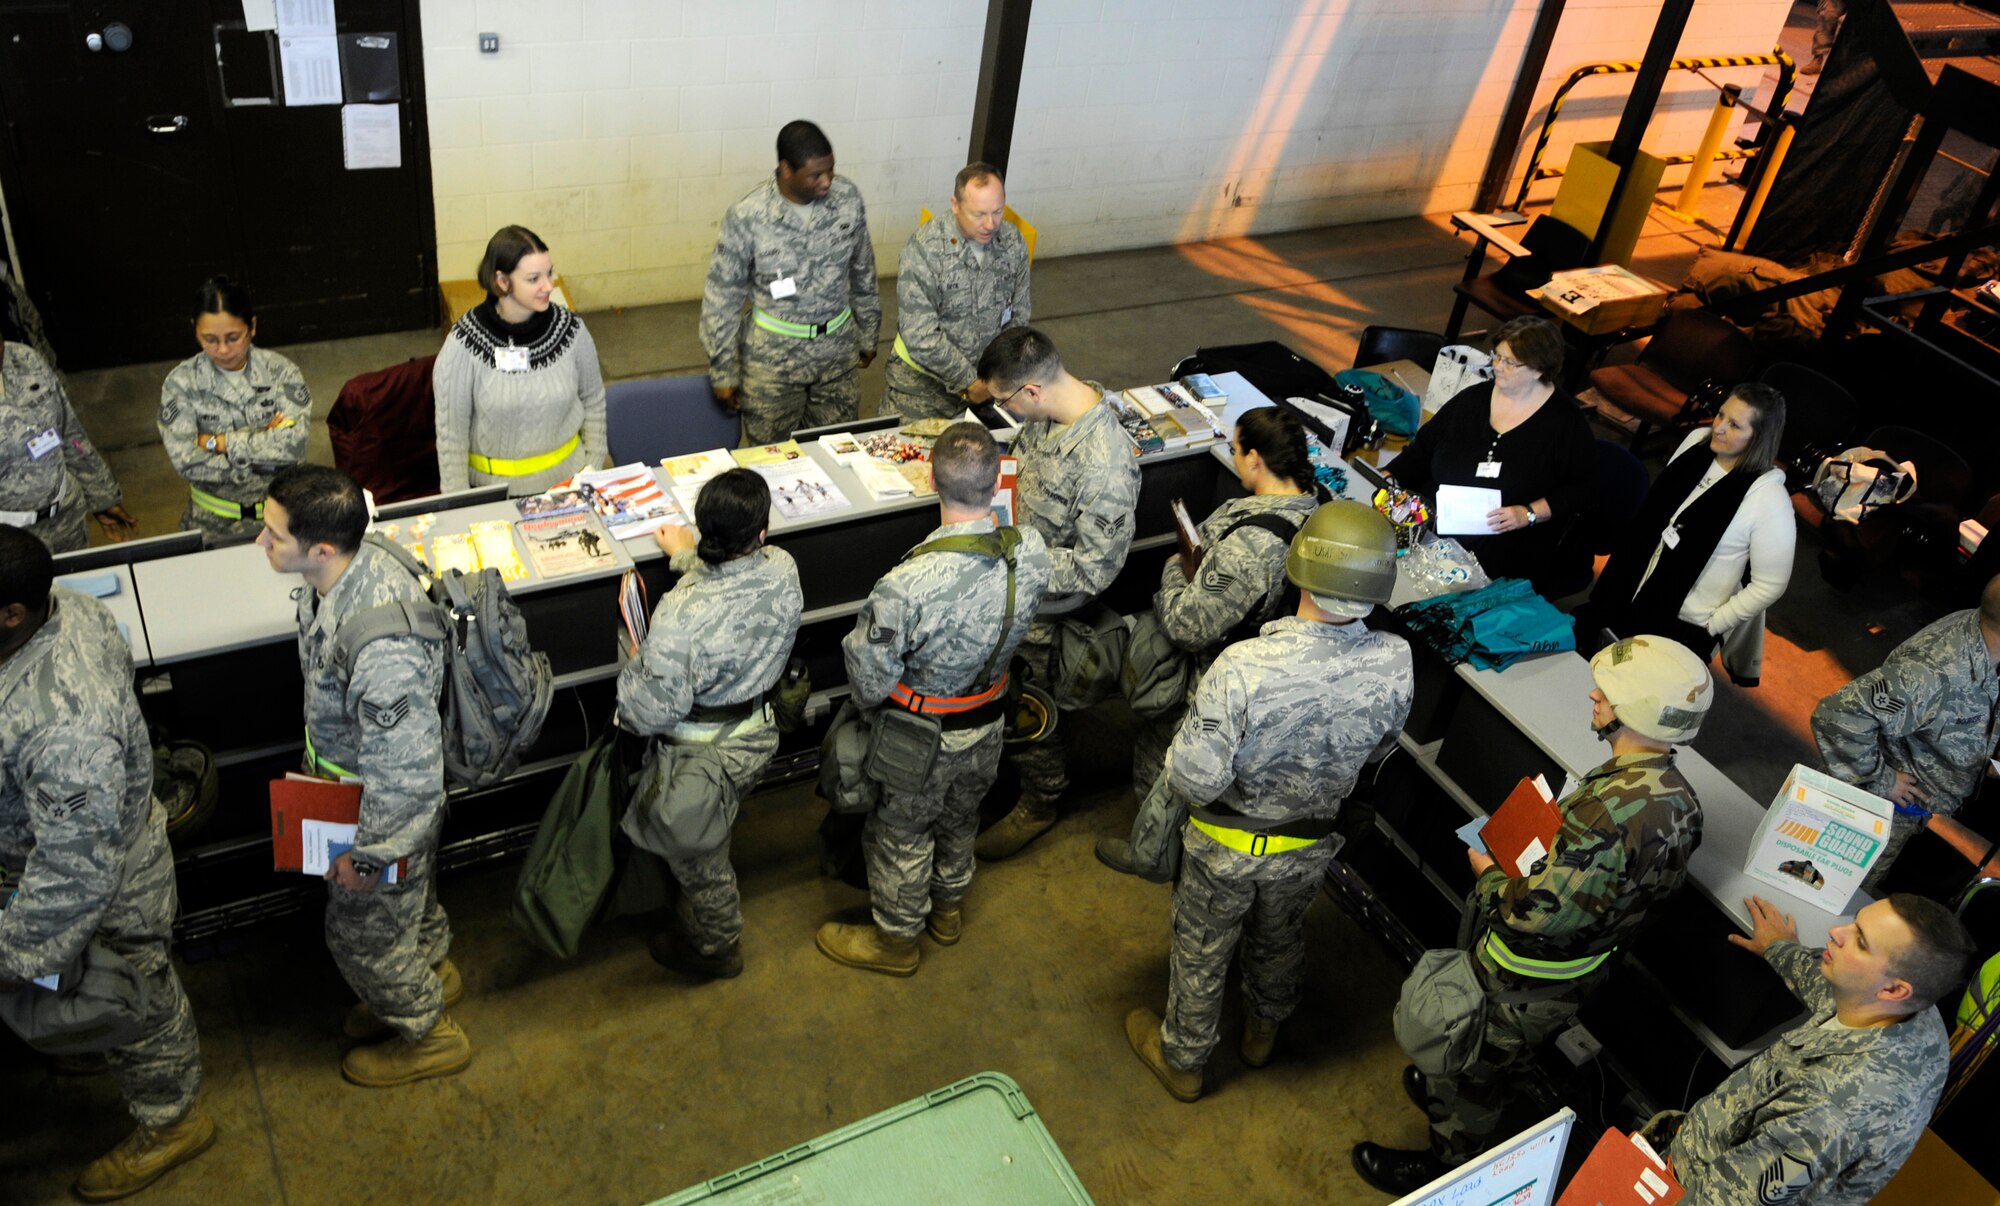 RAF MILDENHALL, England – A processing line prepares Airmen for downrange contingencies during the Phase I Operation Readiness Inspection Oct. 7.  The processing line makes sure Airmen have everything they need in a deployed environment.  (U.S. Air Force photo by Staff Sgt. Christopher L. Ingersoll)